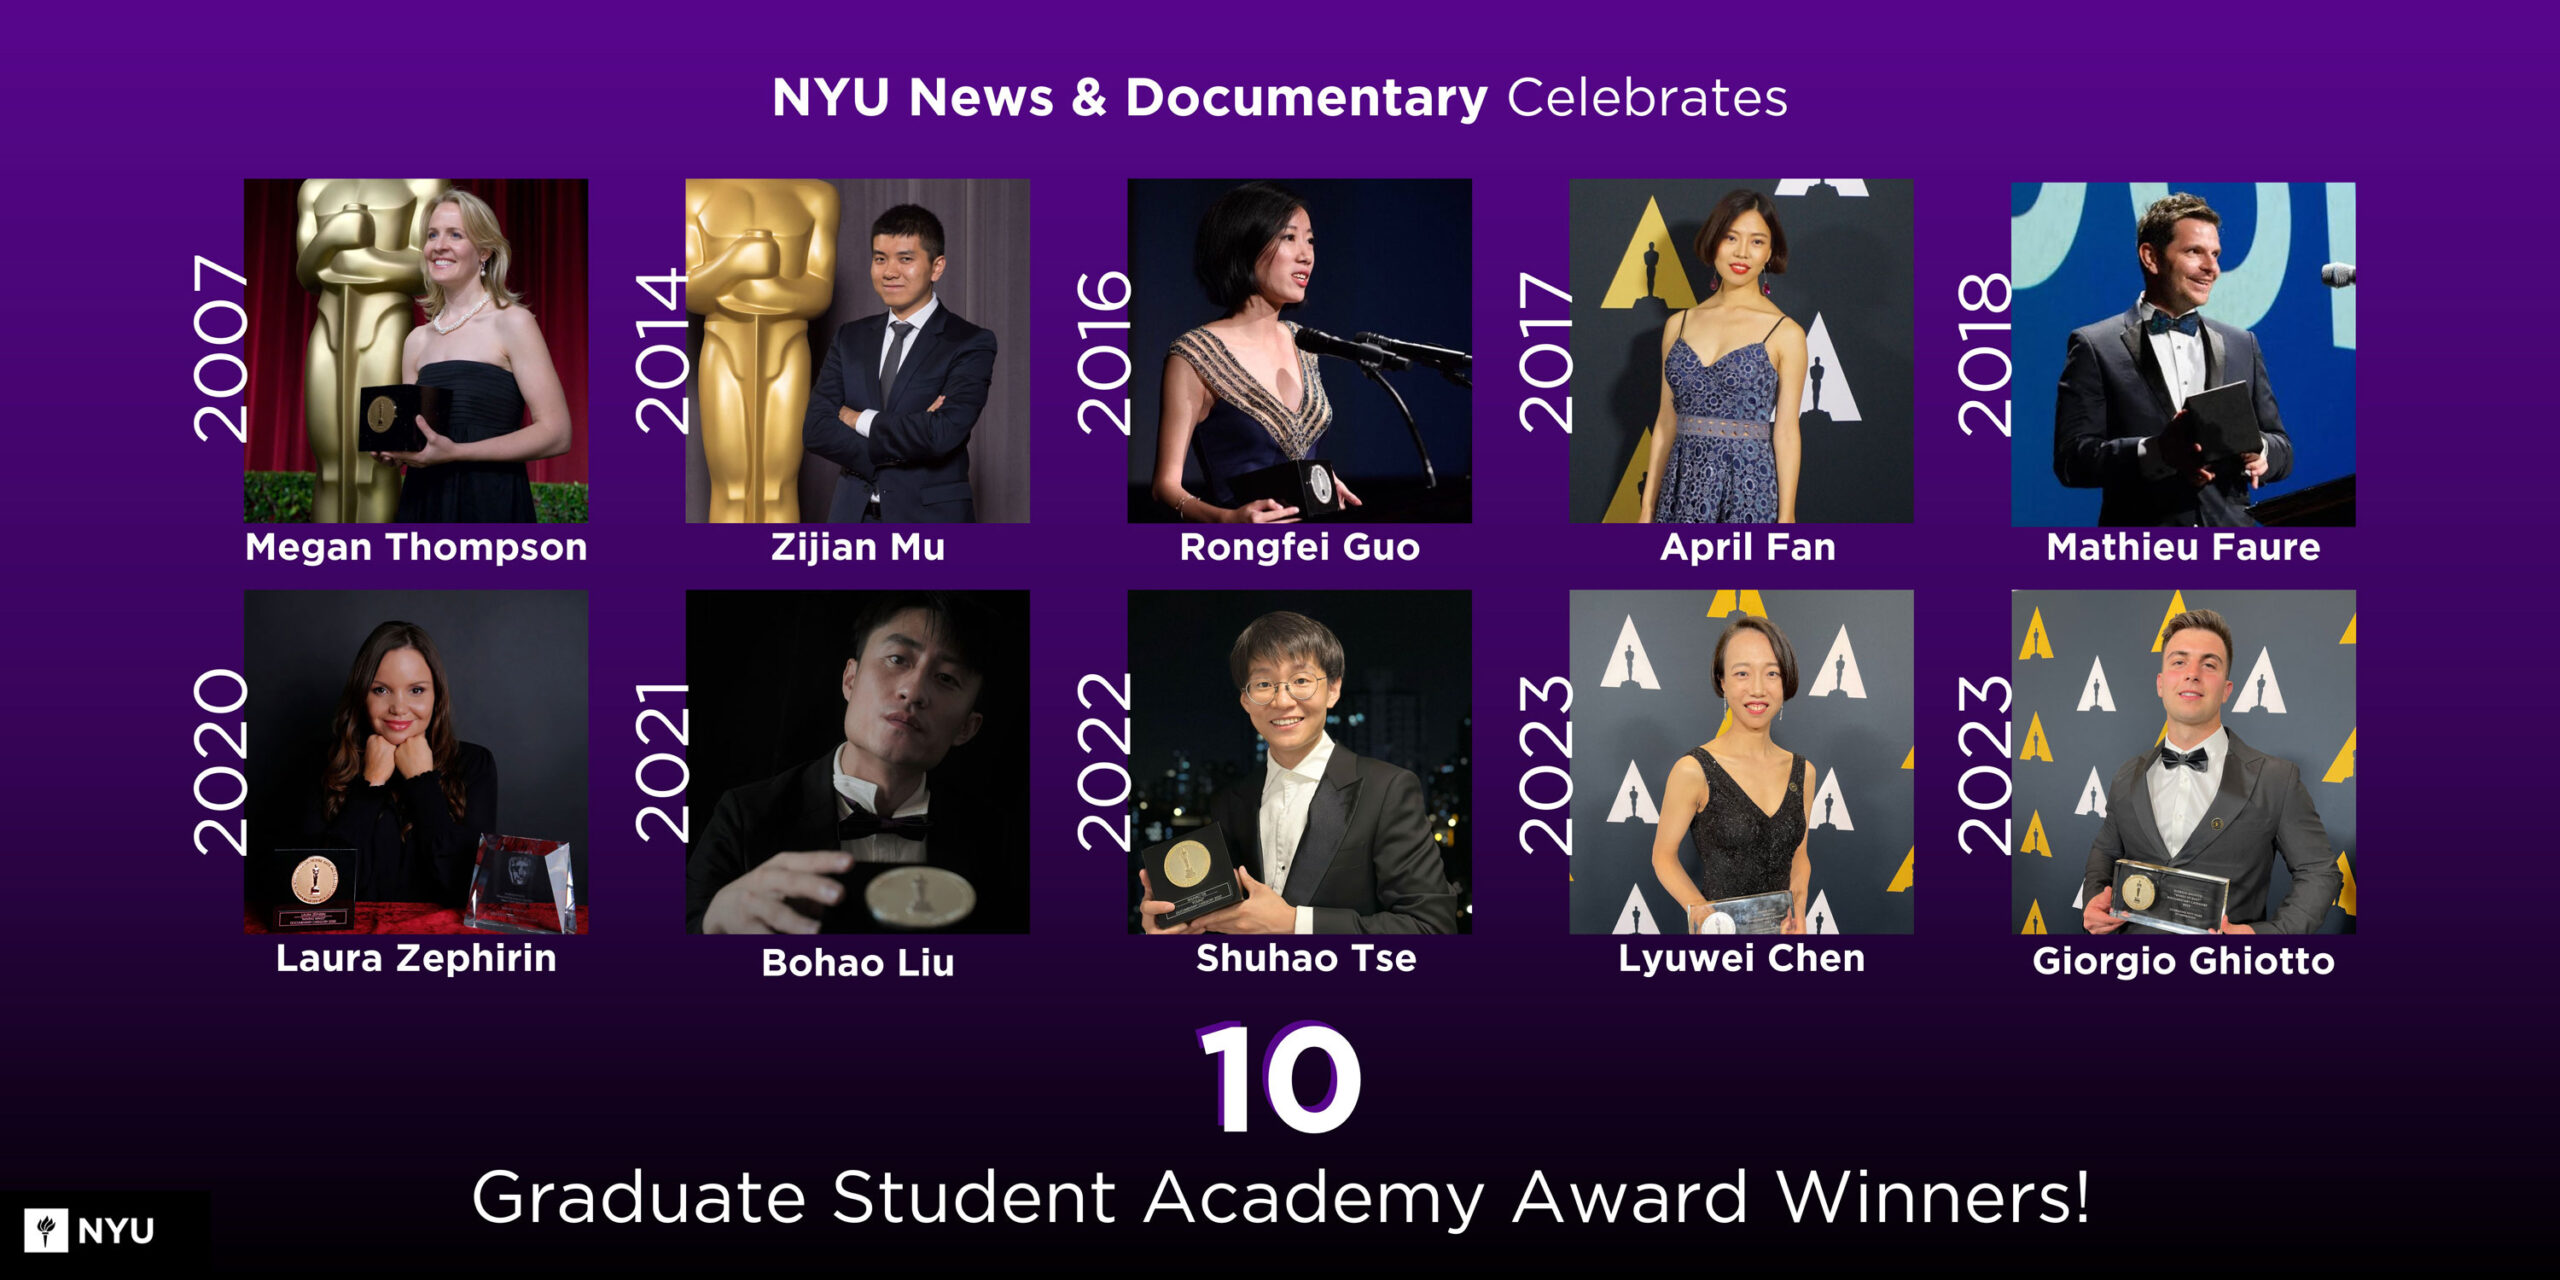 Banner Showing photos of 10 student academy award winners from NewsDoc